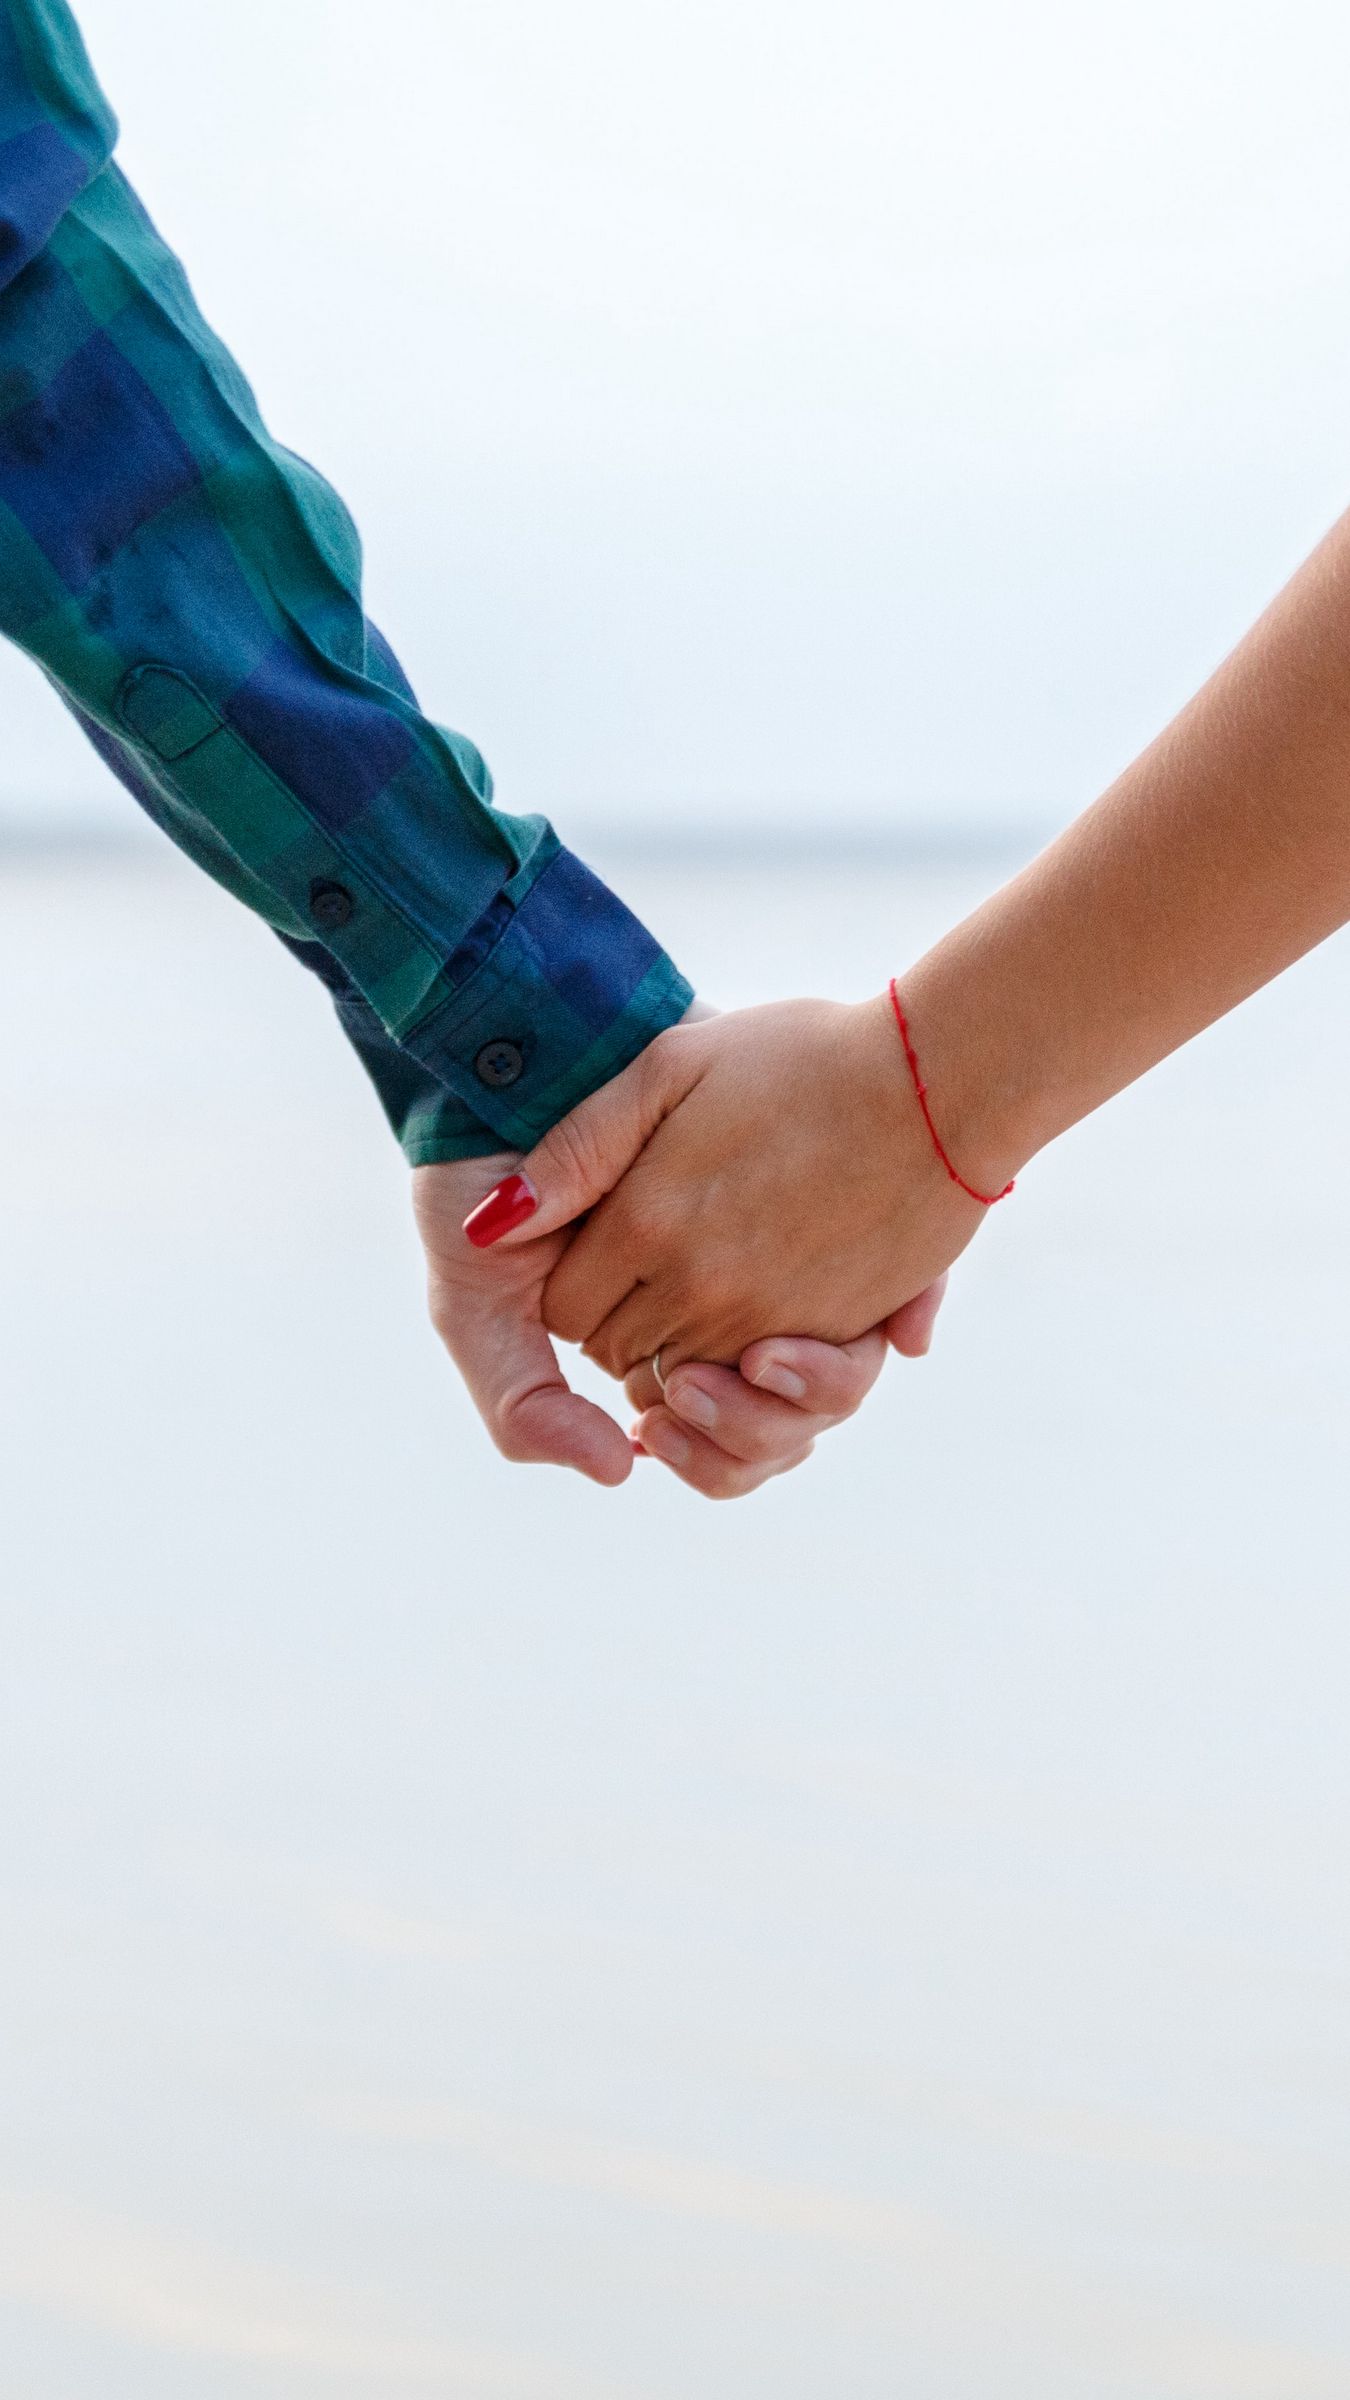 Download wallpaper 1350x2400 love, couple, hands iphone 8+/7+/6s+/6+ for  parallax hd background